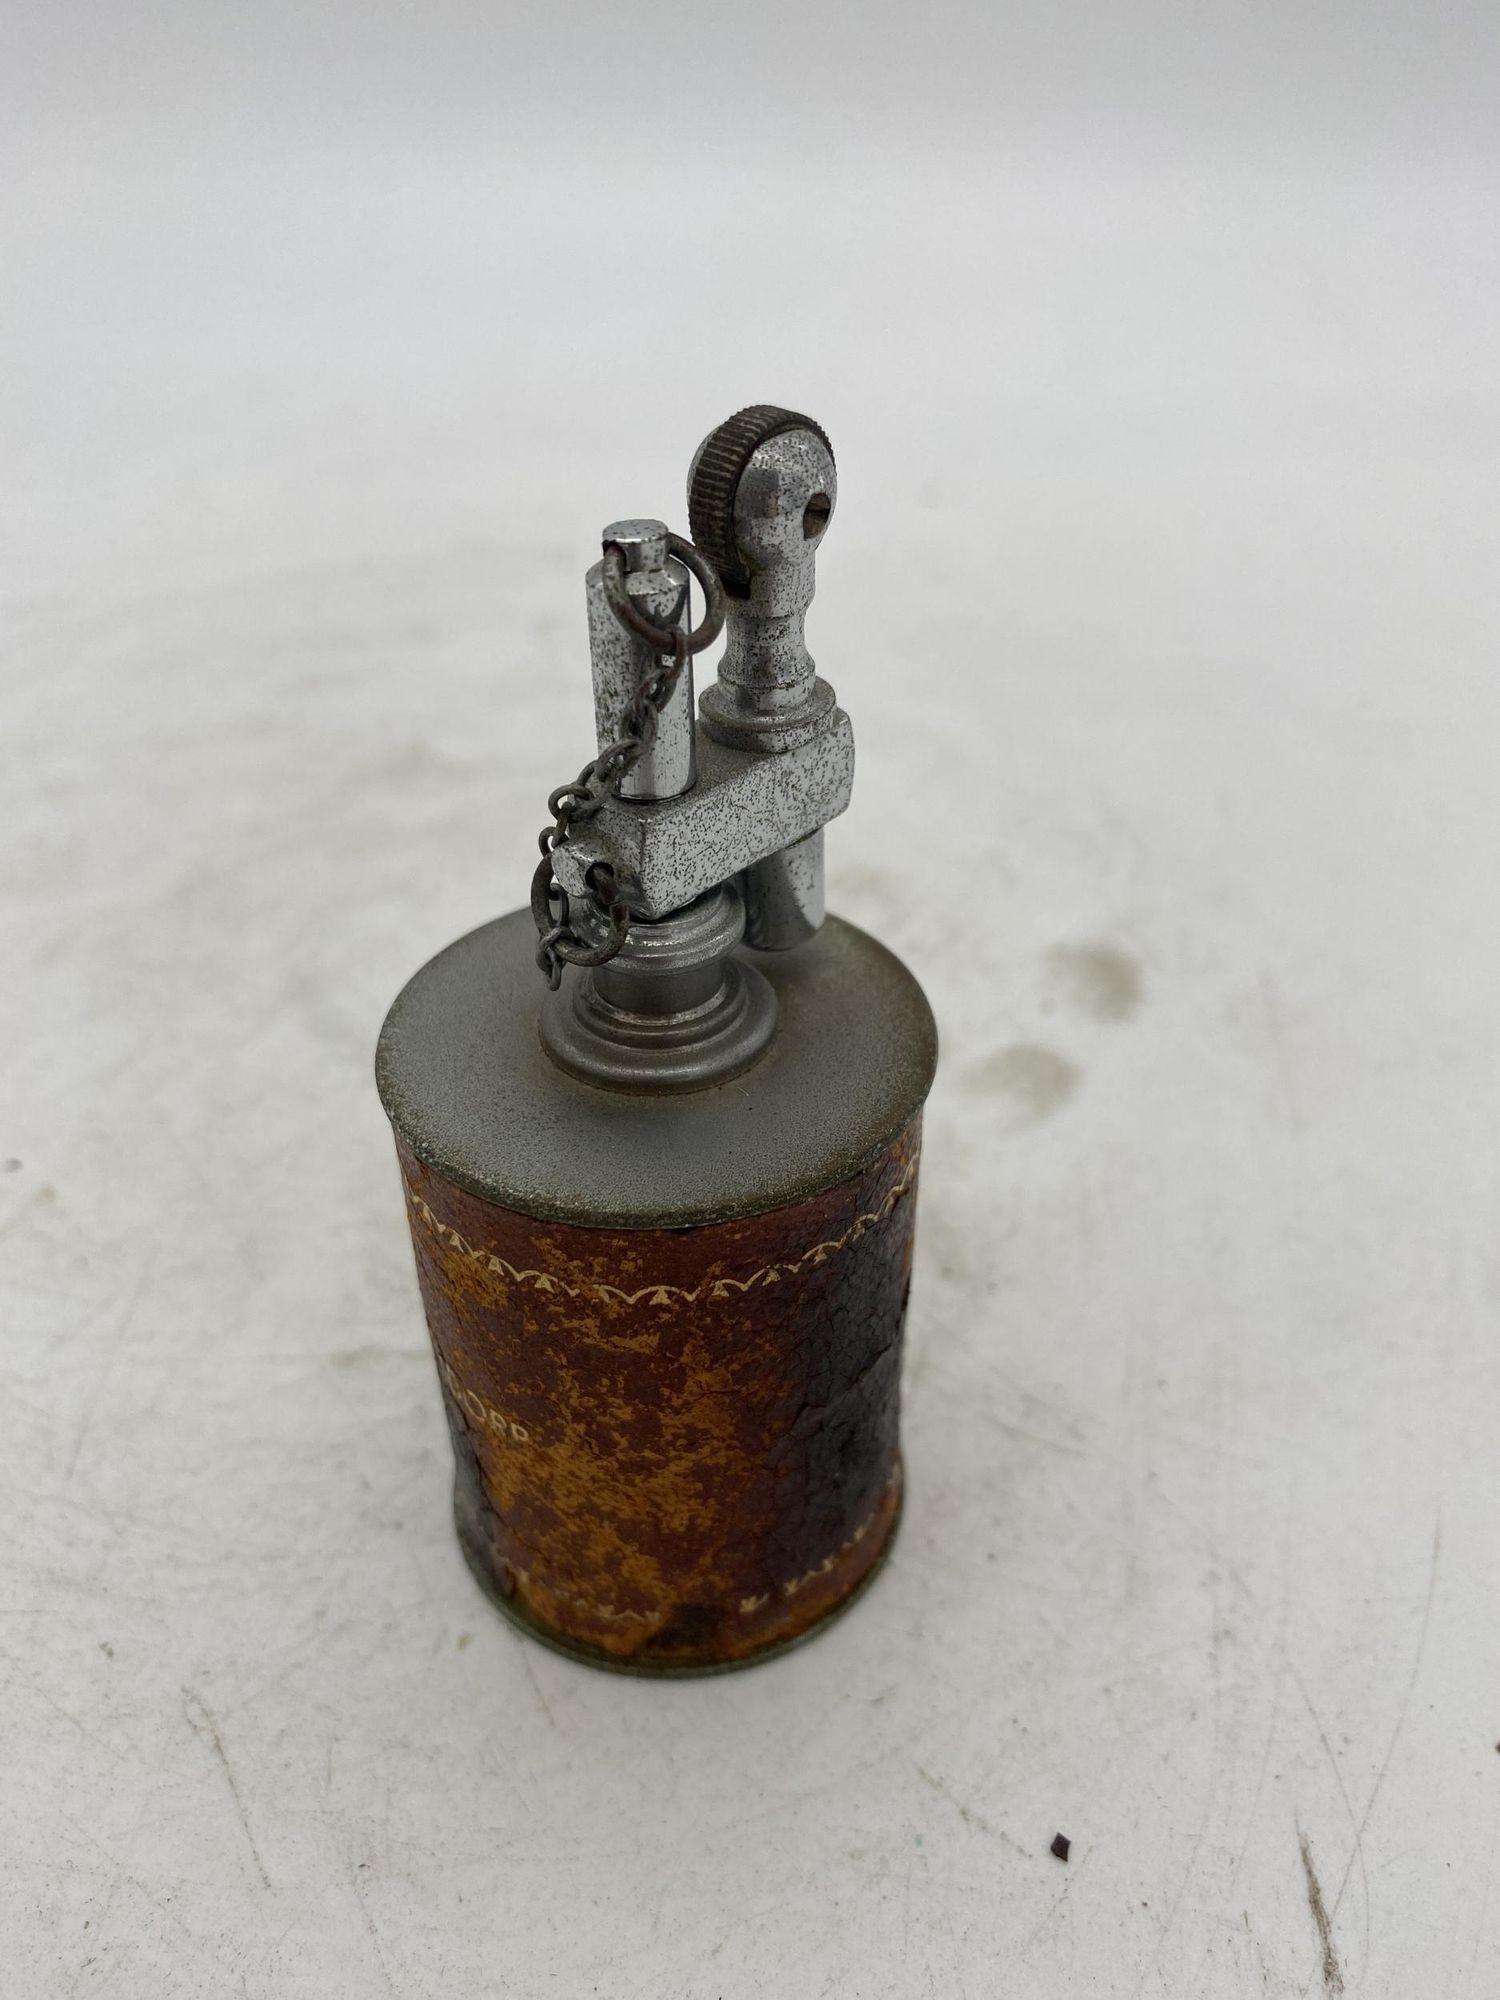 Antique Table Cigarette Lighter By AR, The Executive. Leather Wrap, Chrome. , Circa 1930.
 
It is in great antique condition and measures 3 1/2 inches tall.